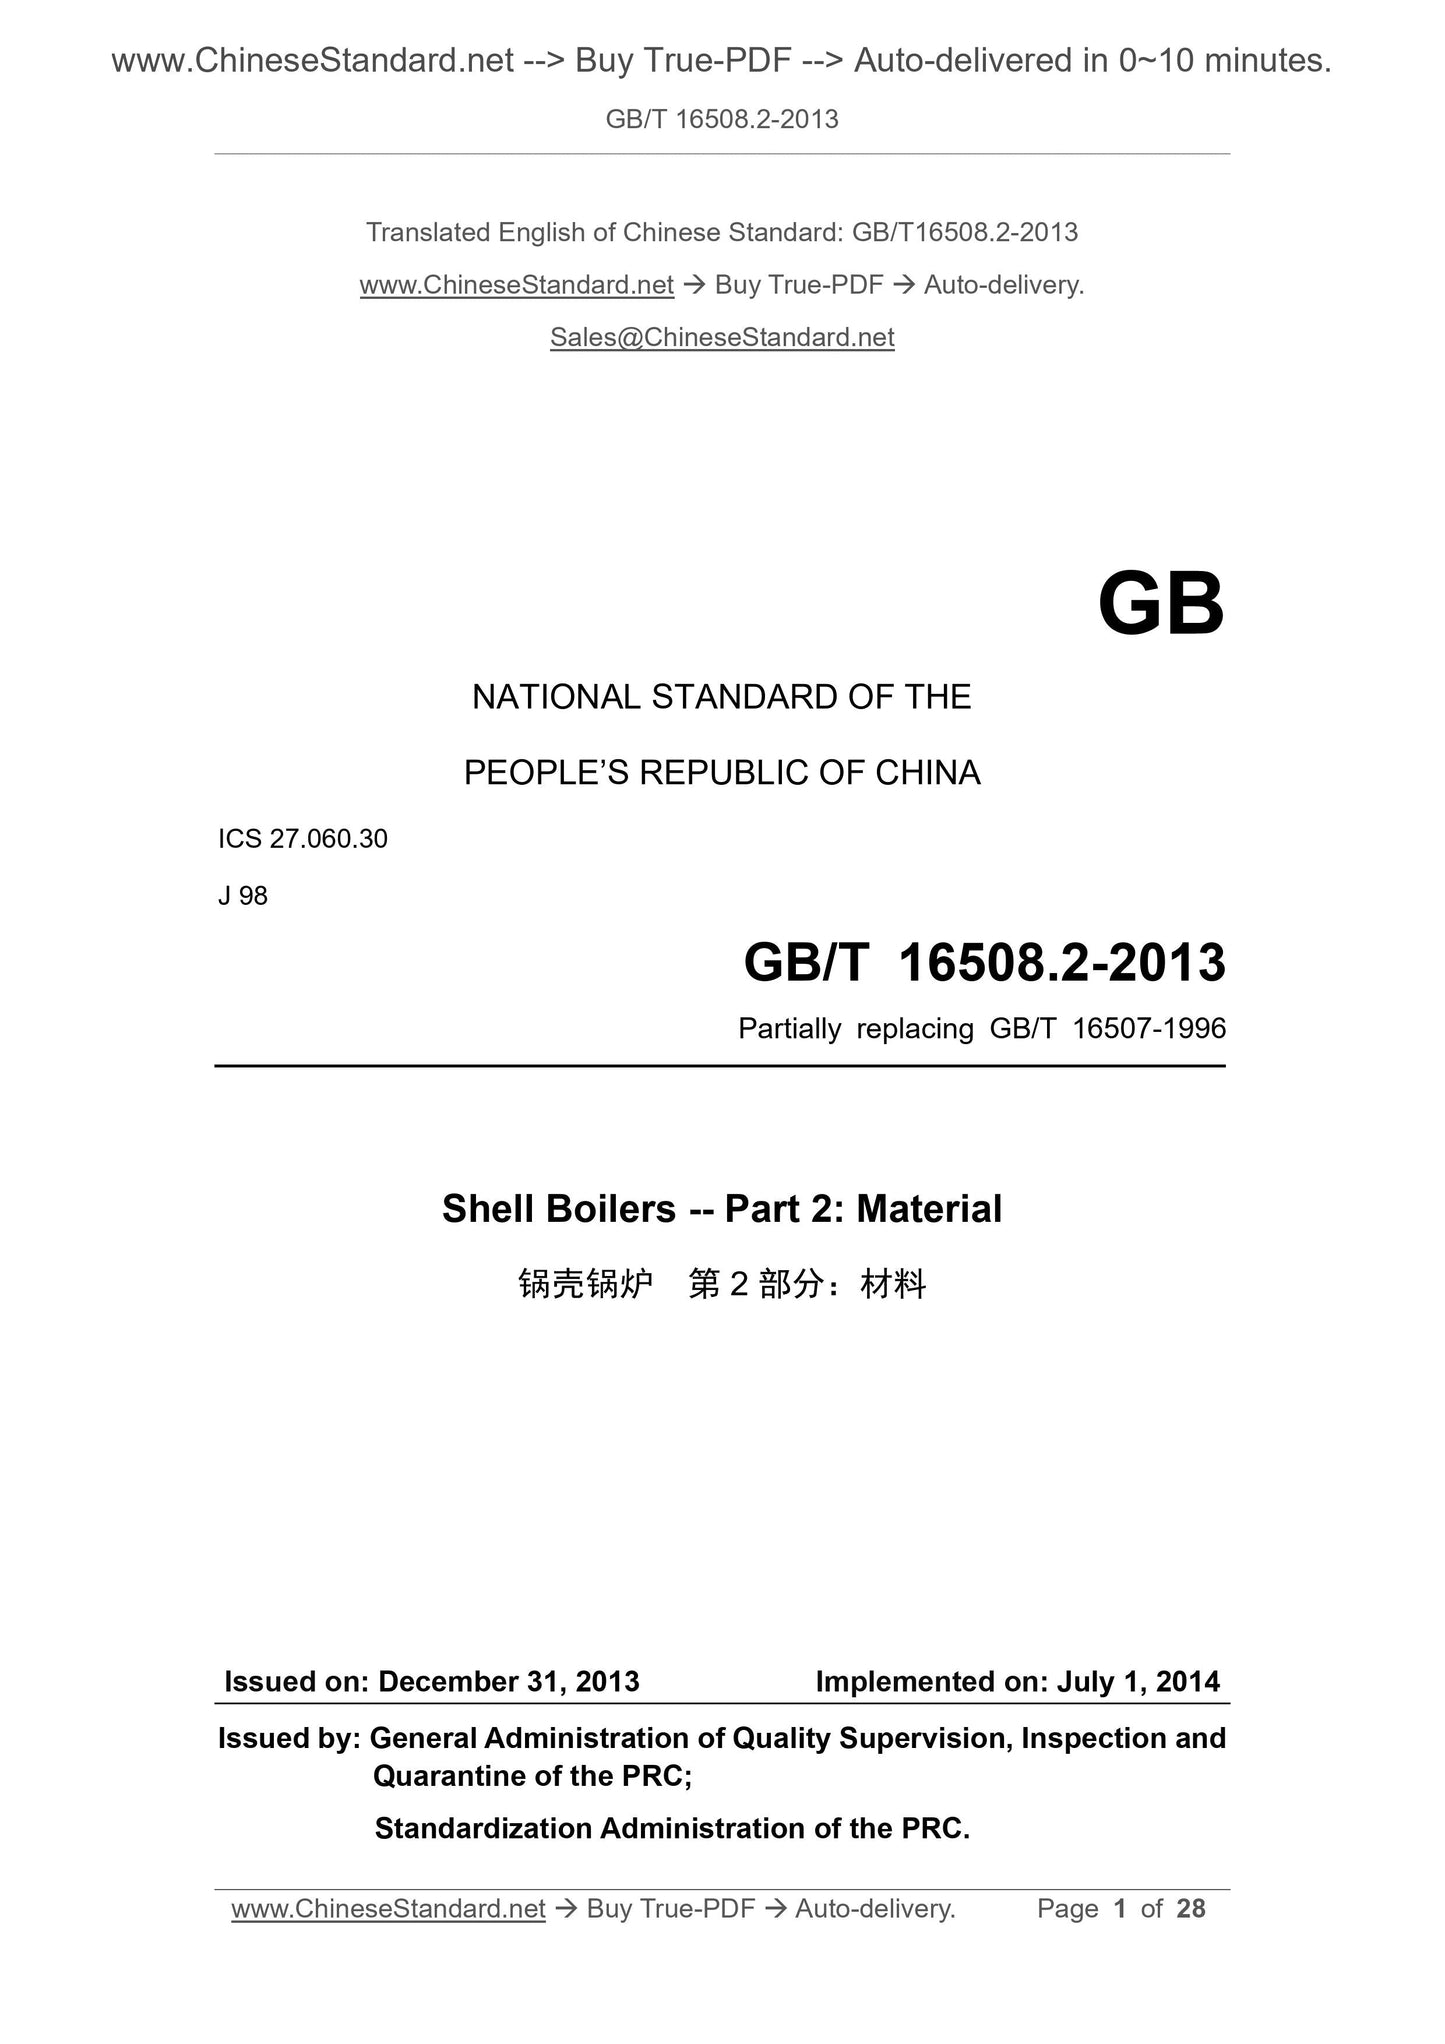 GB/T 16508.2-2013 Page 1